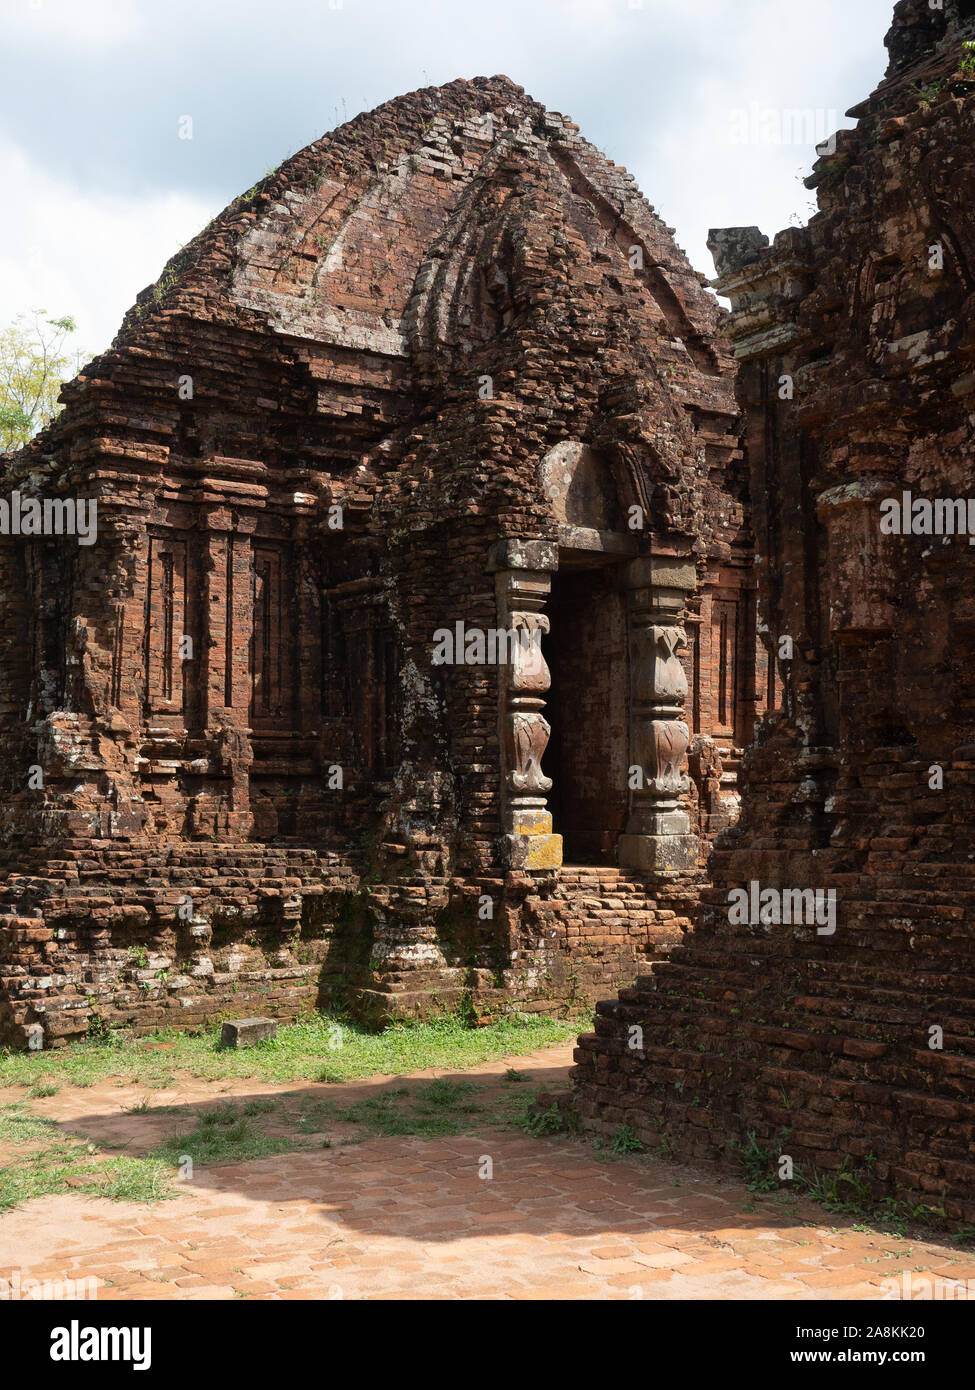 The front of an ancient Champa Hindu Temple with carvings around entrance and a domed roof. Stock Photo